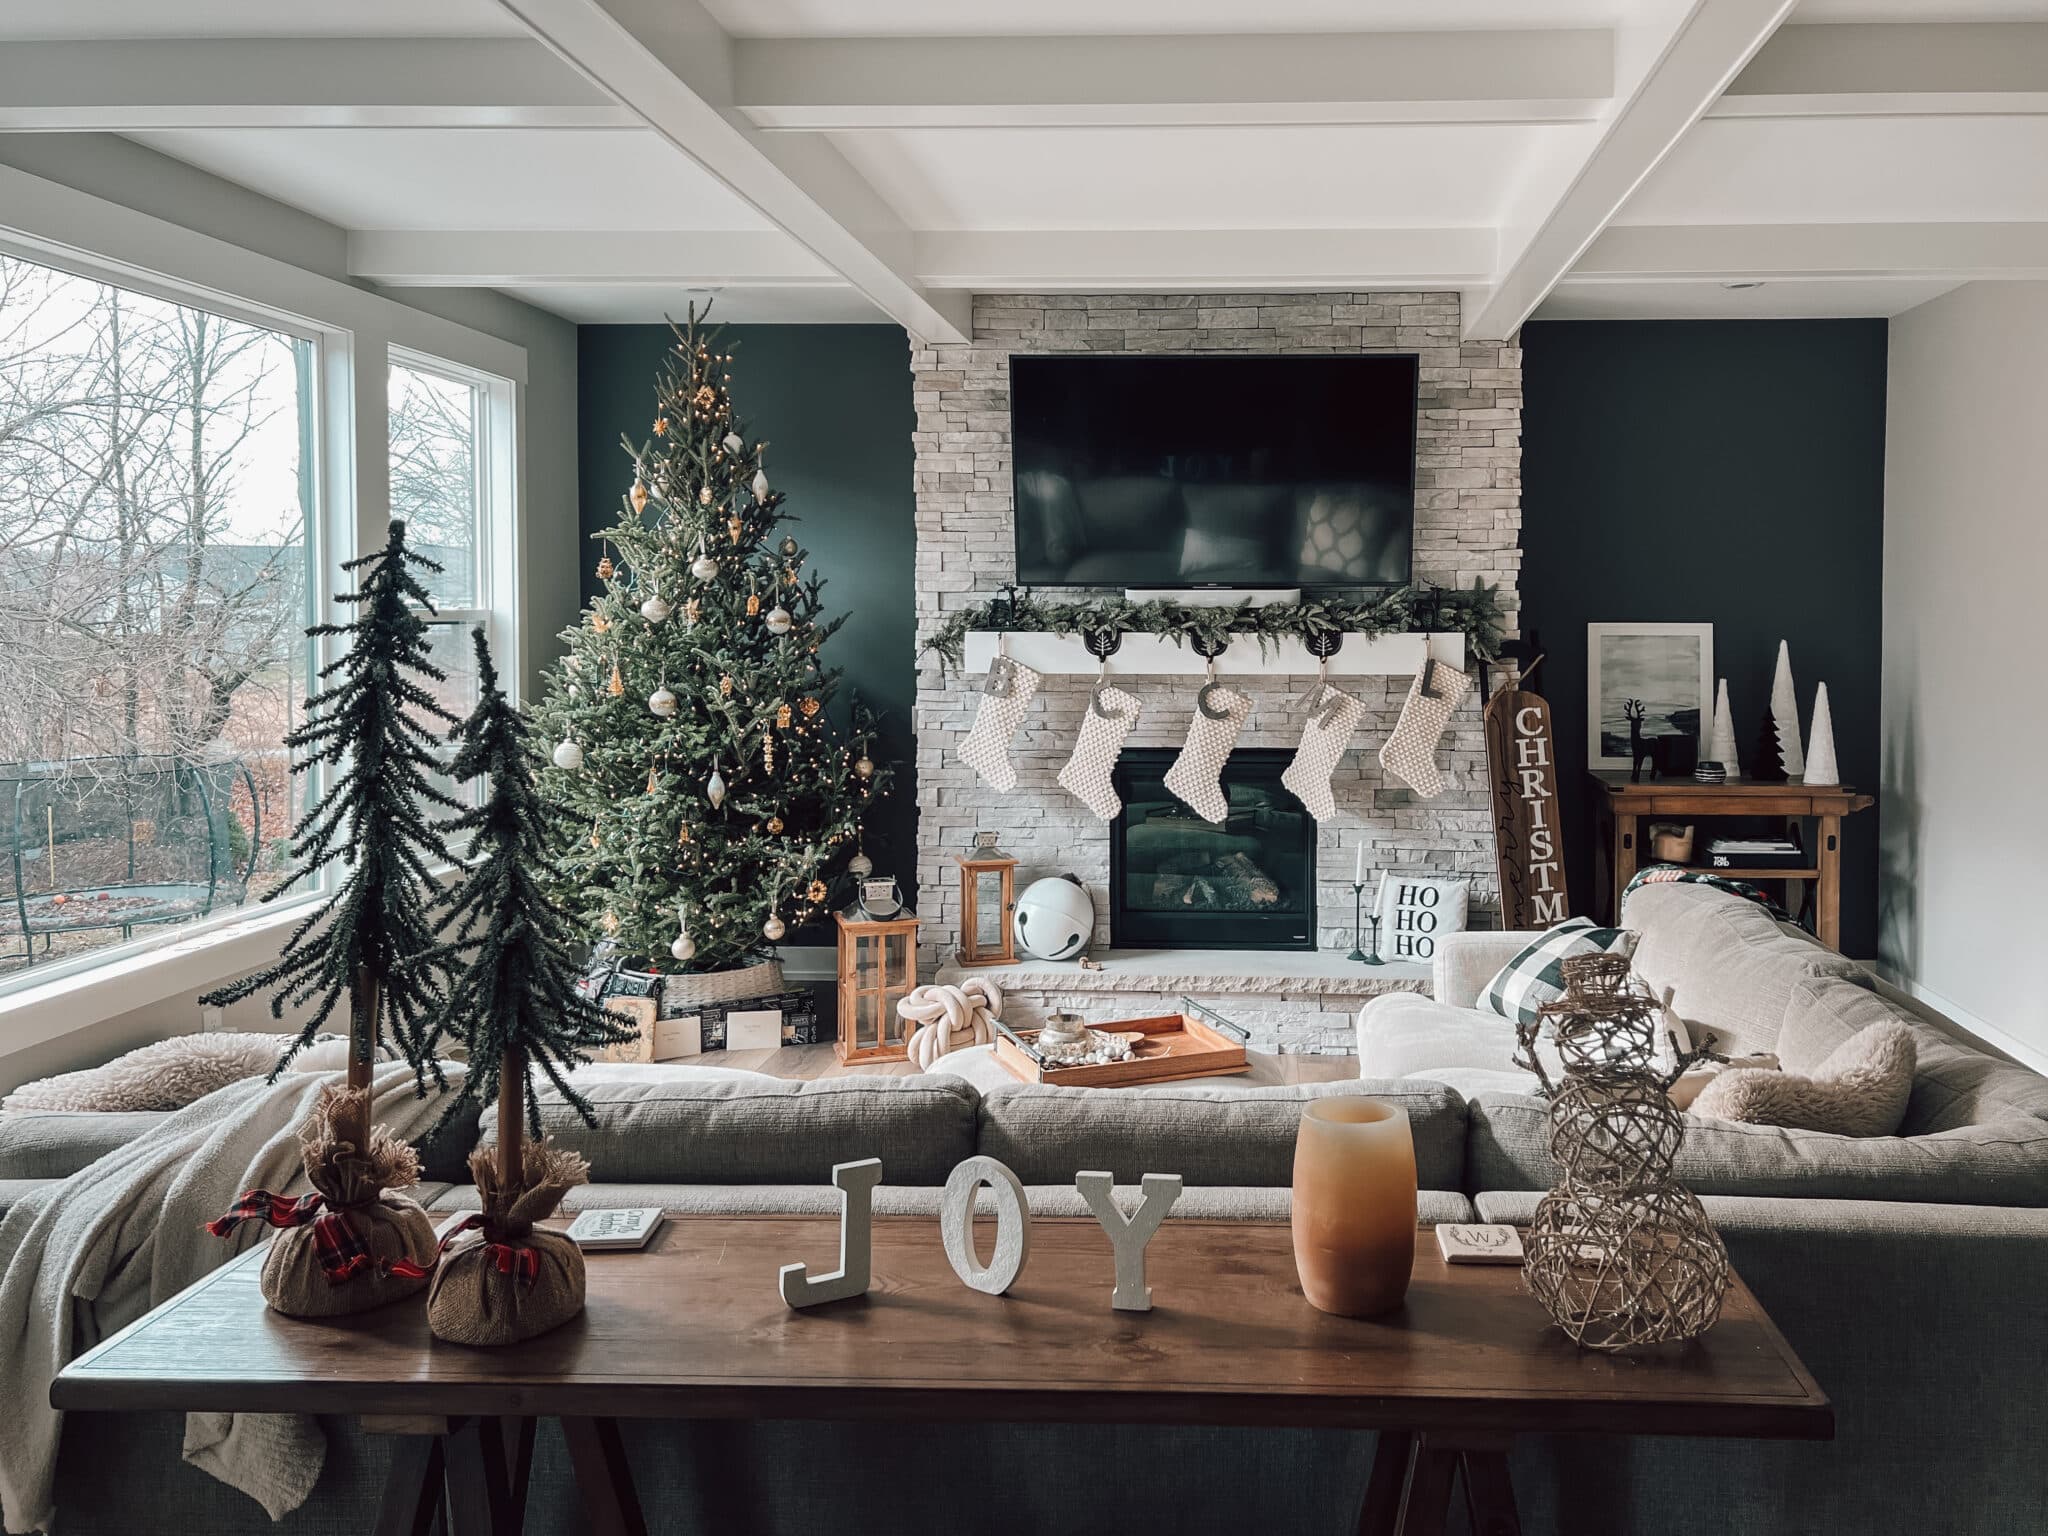 Christmas decor, Modern Farmhouse decor, kendall charcoal accent wall, white stone fireplace